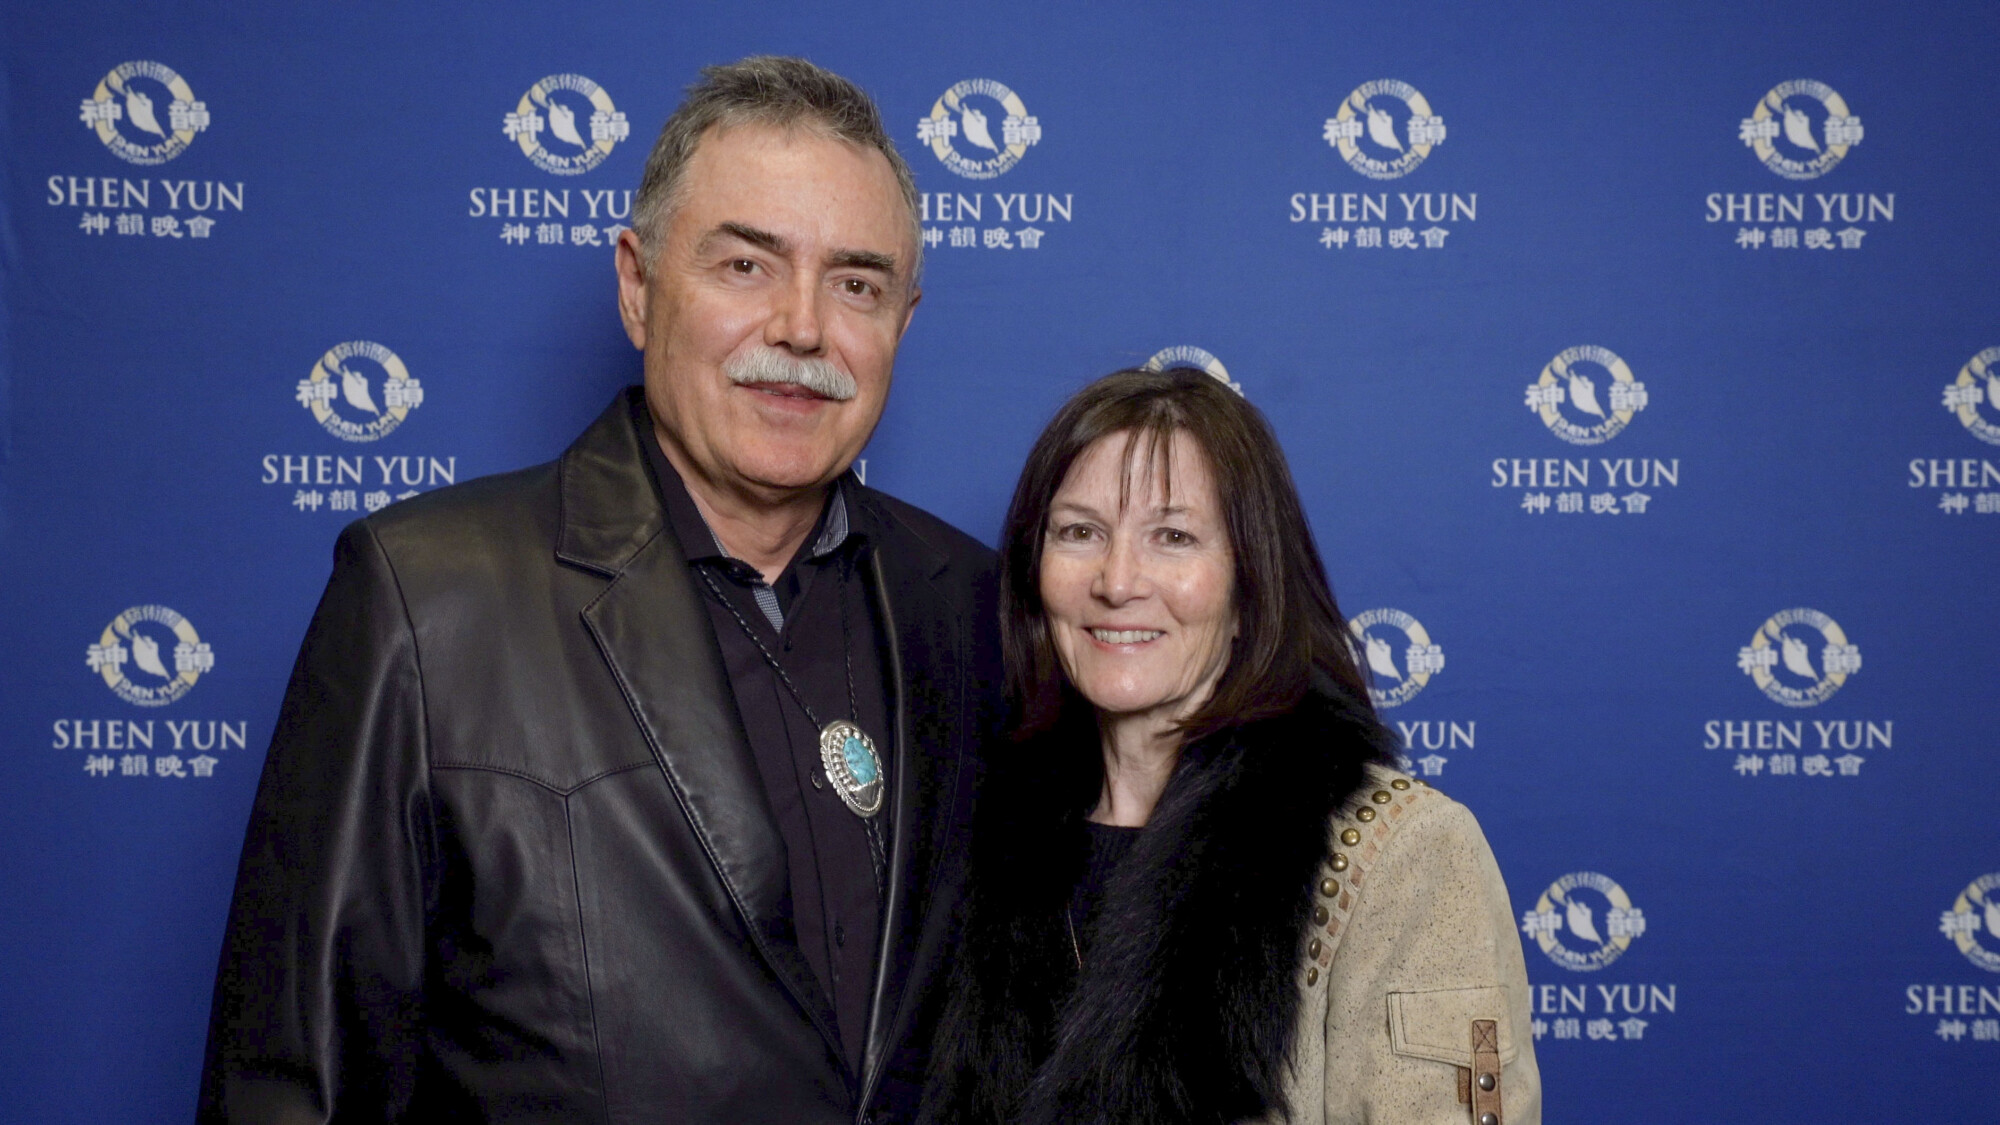 Pilot Feels ‘Uplifted’ and ‘Happier’ After Shen Yun